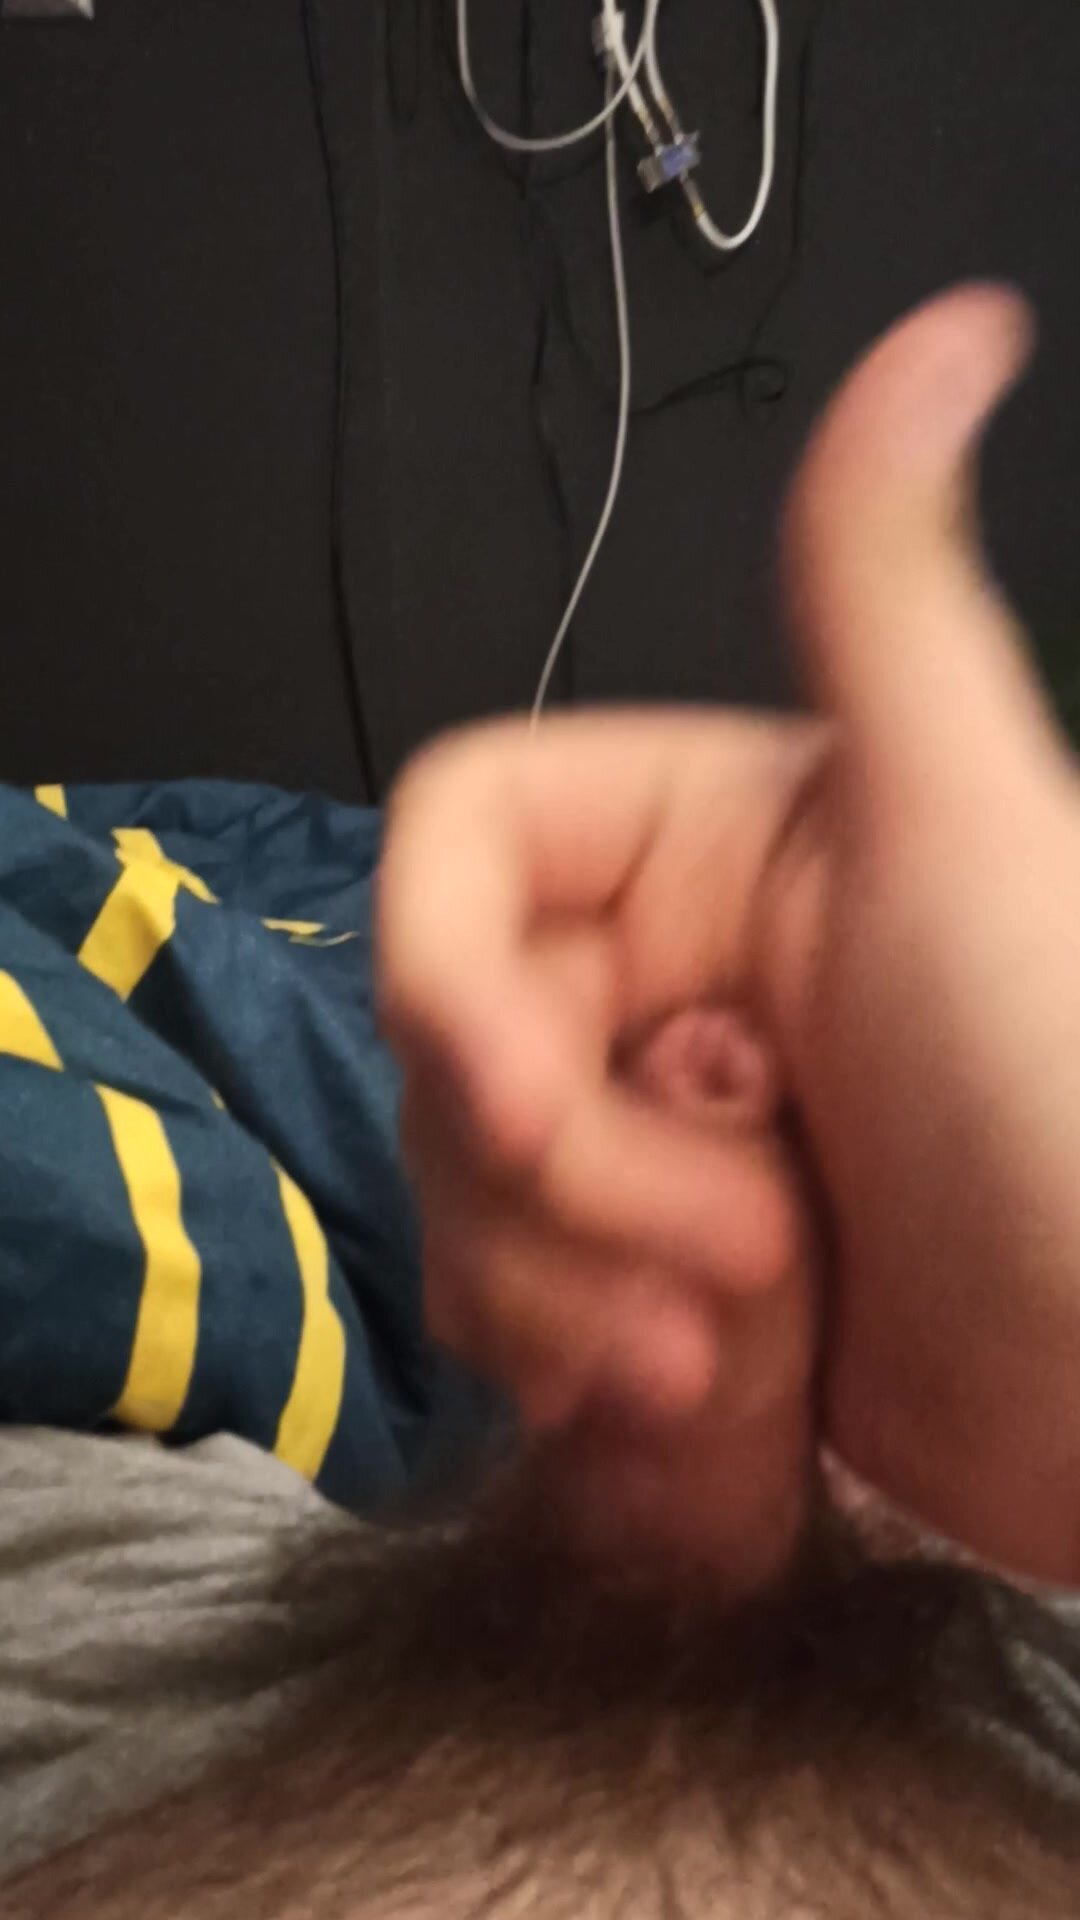 Me playing with my uncut cock